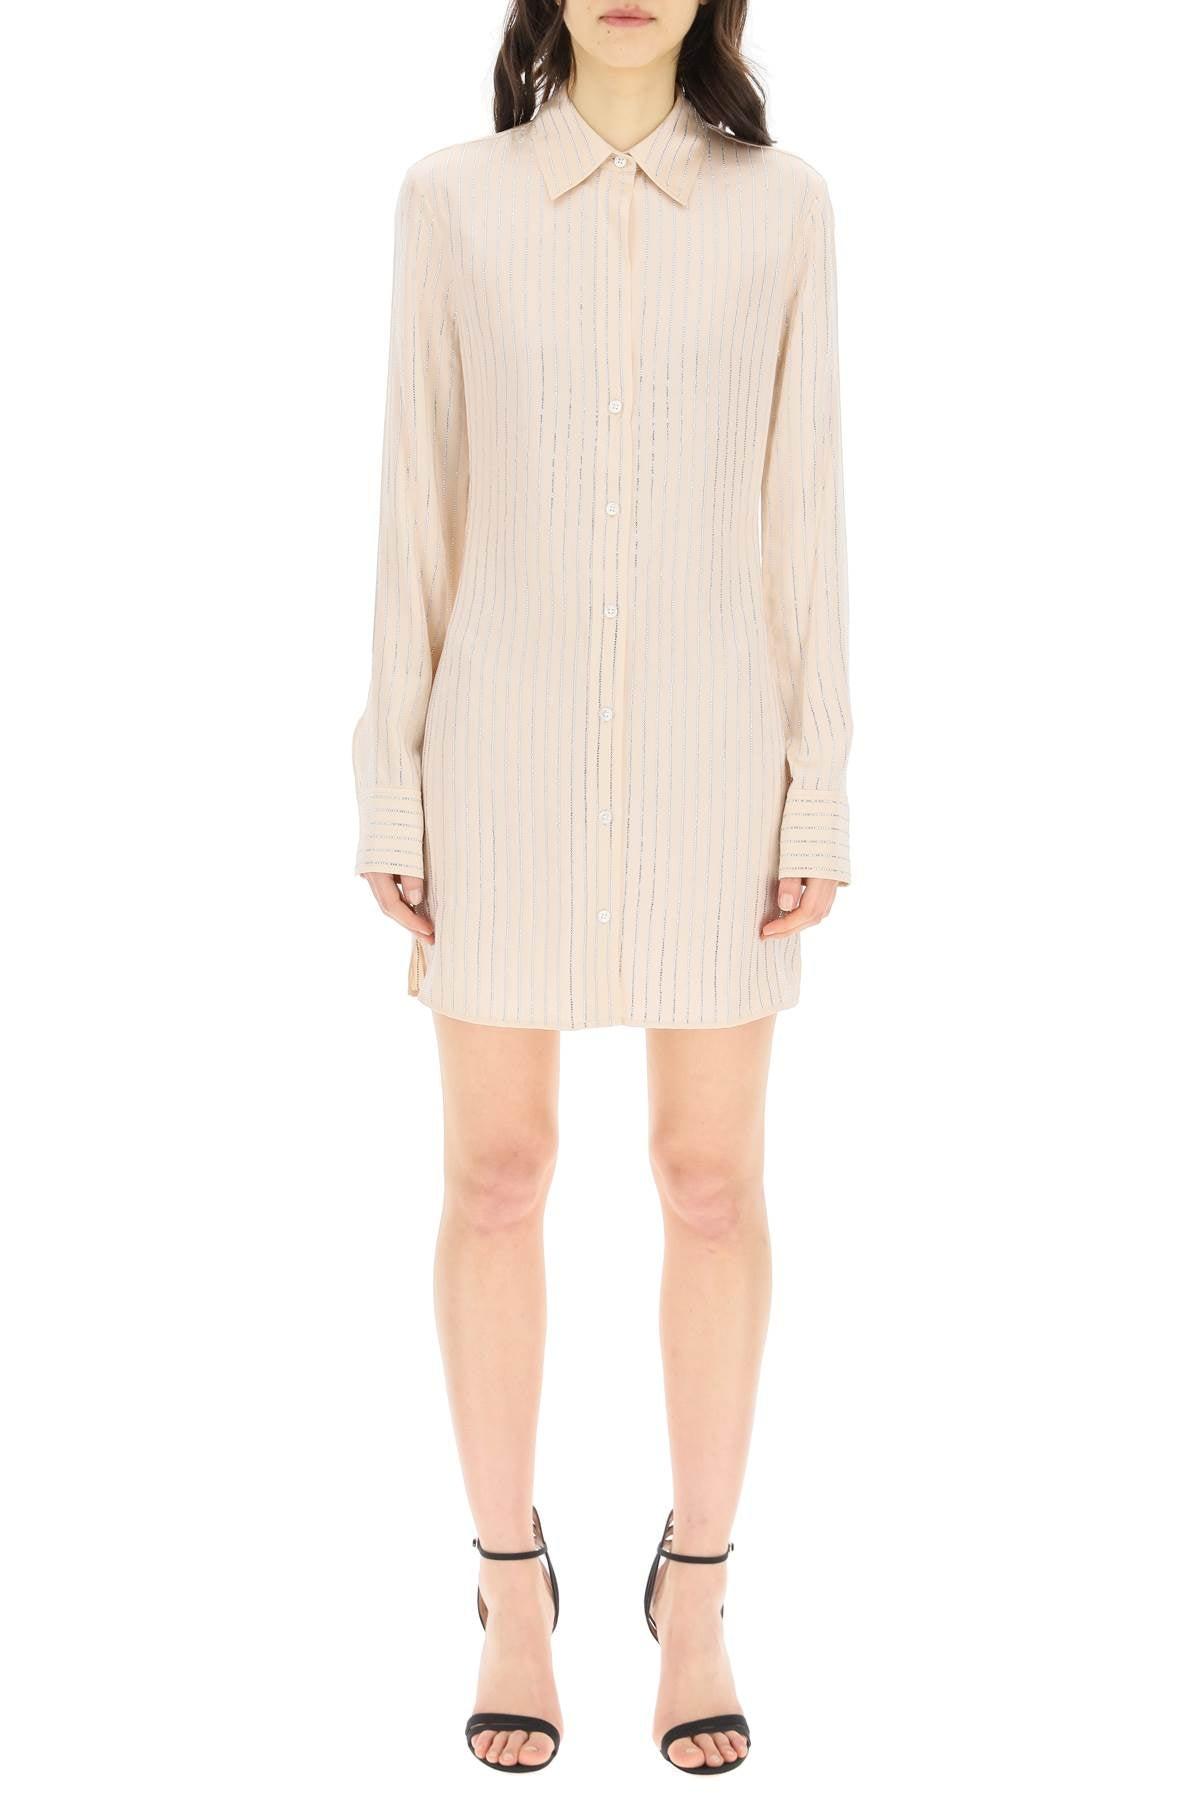 Alexander Wang Silk Mini Dress With Crystals in Natural - Lyst